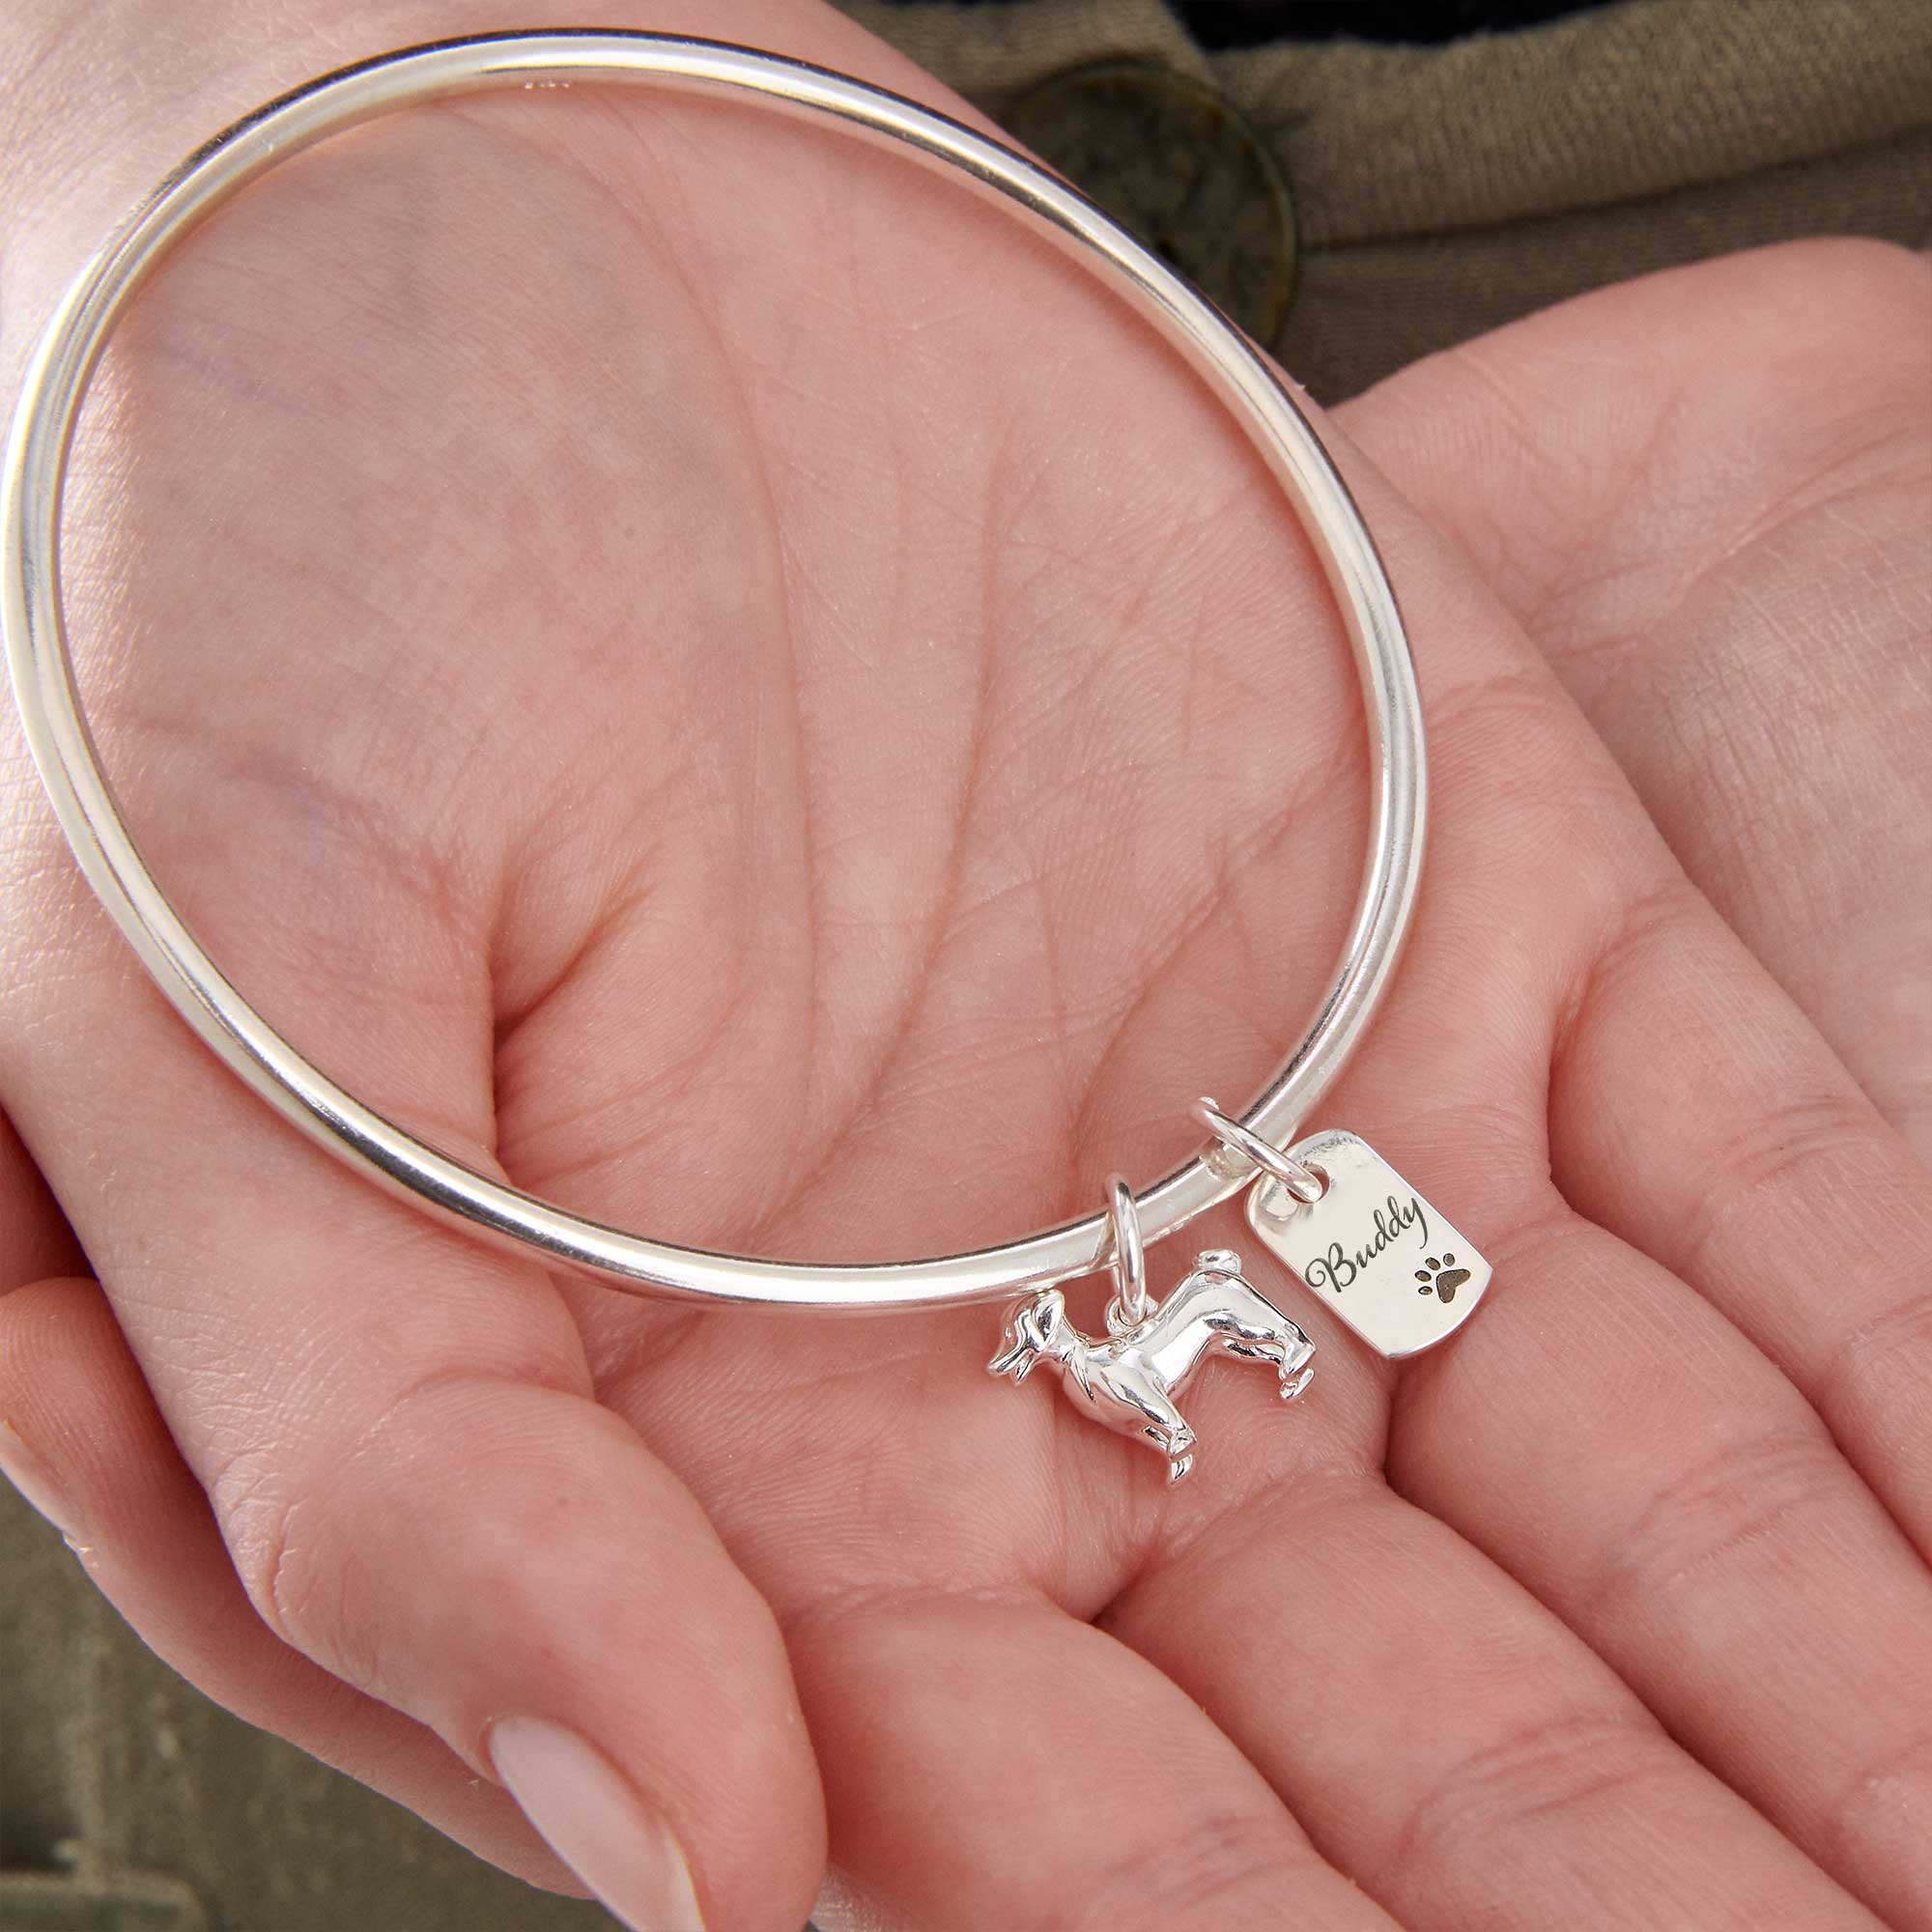 personalised jack russell terrier silver charm bangle sterling silver made in UK Scarlett Jewellery